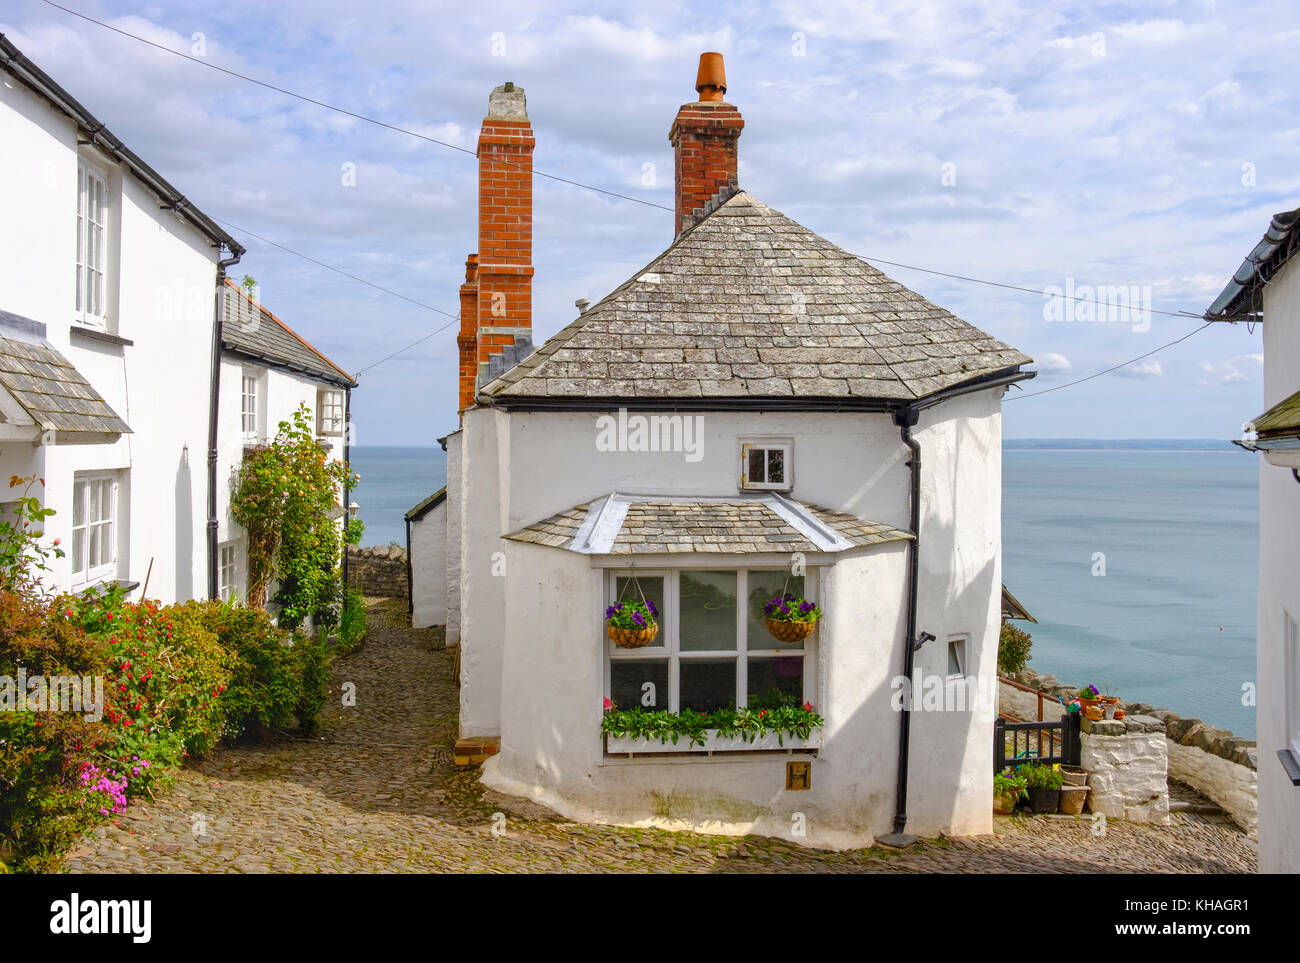 Small house by the sea, Clovelly, Devon, England, Great Britain Stock Photo